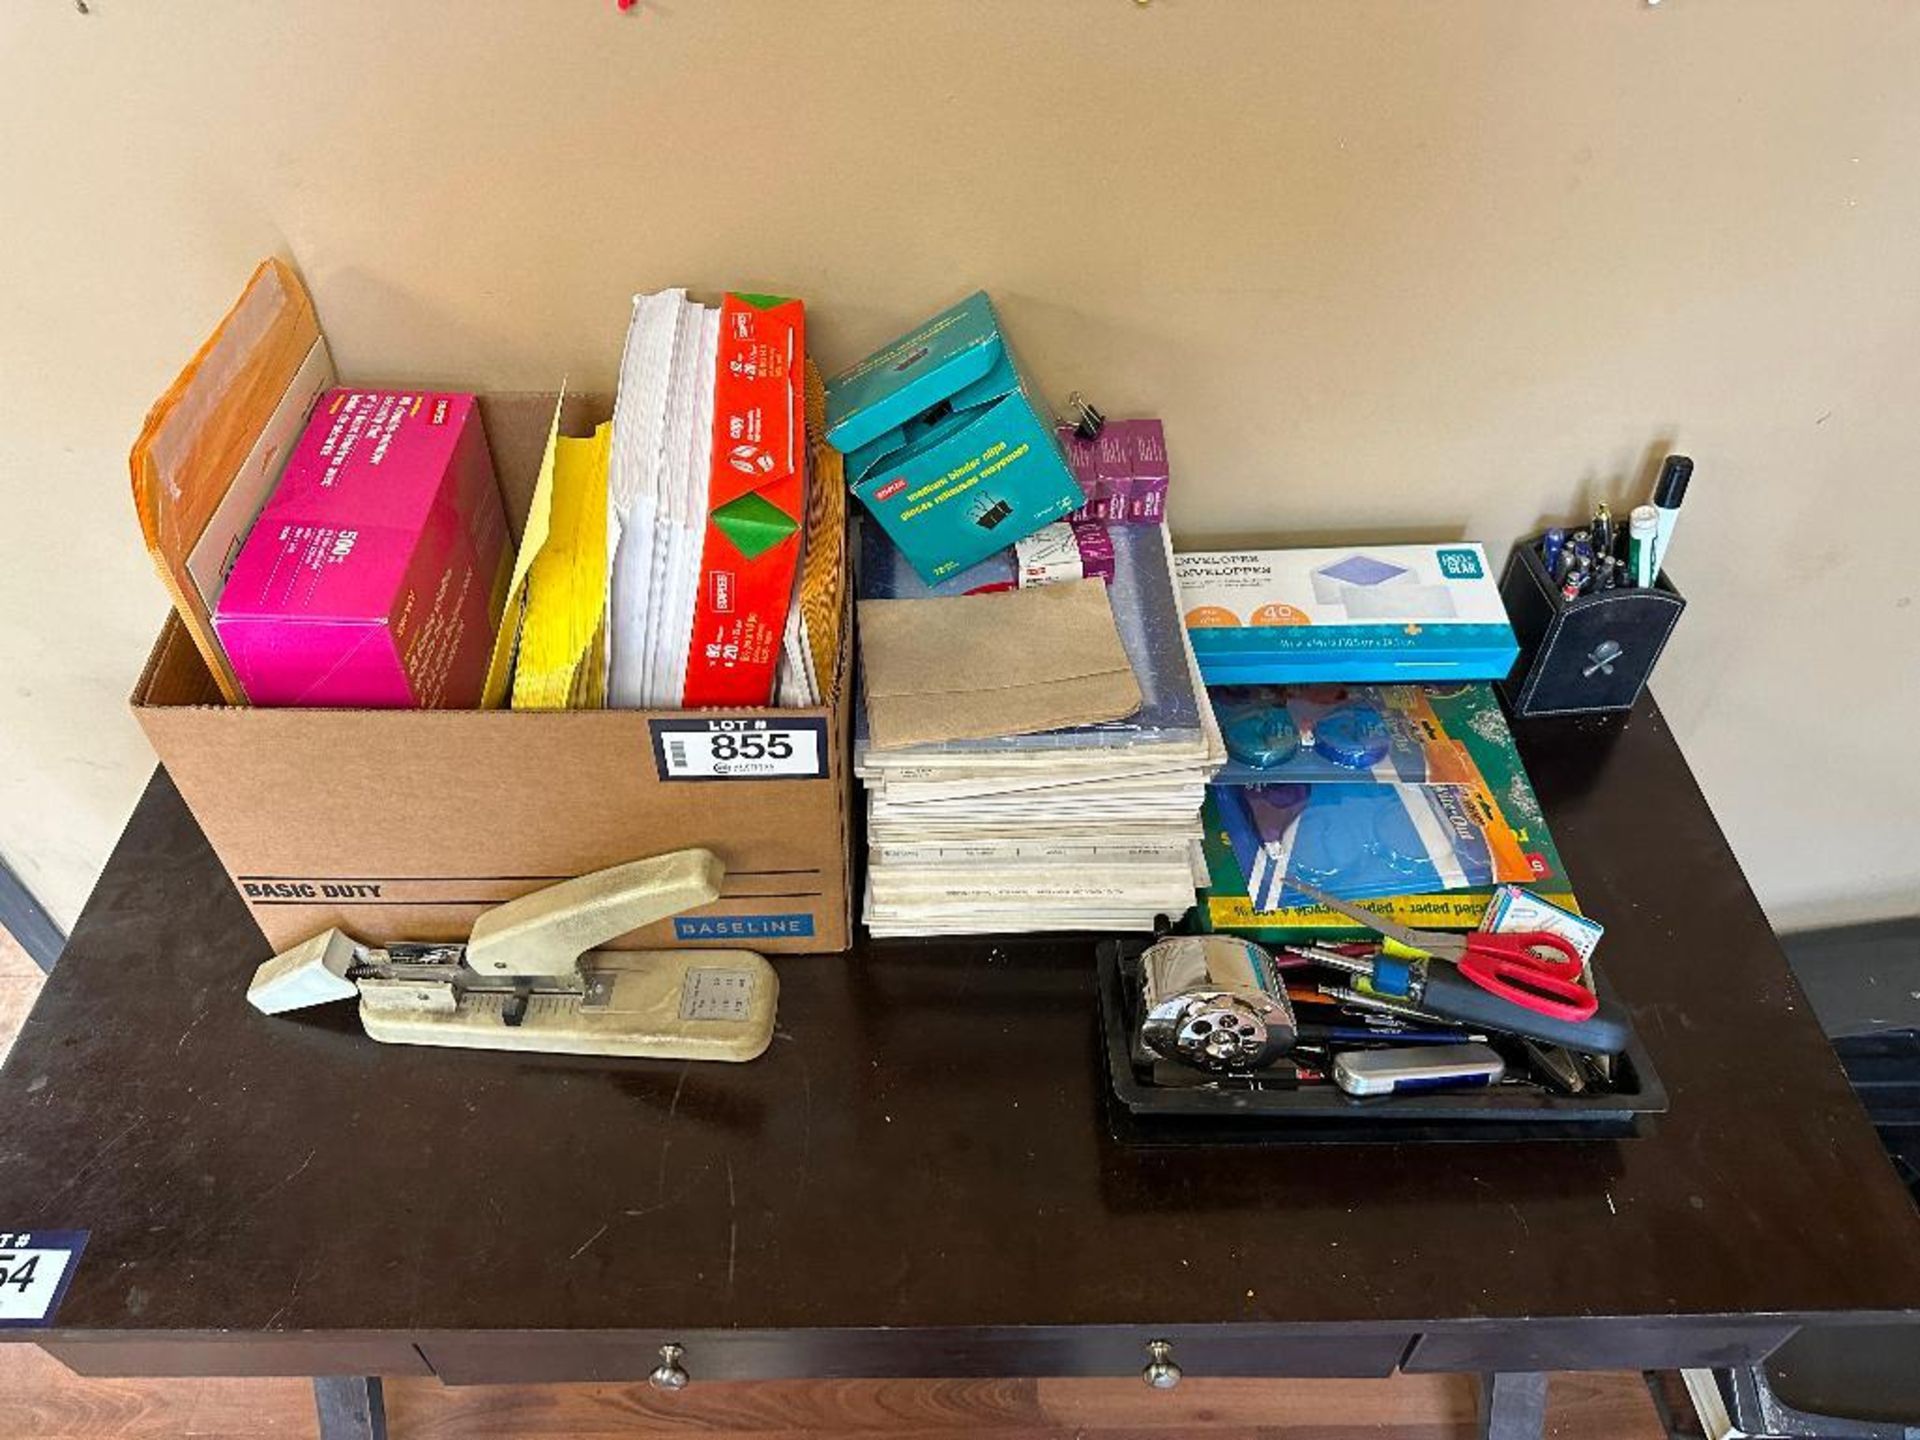 Lot of Asst. Stationery Supplies Including File Organizers, Paper, Pens, etc. - Image 2 of 3